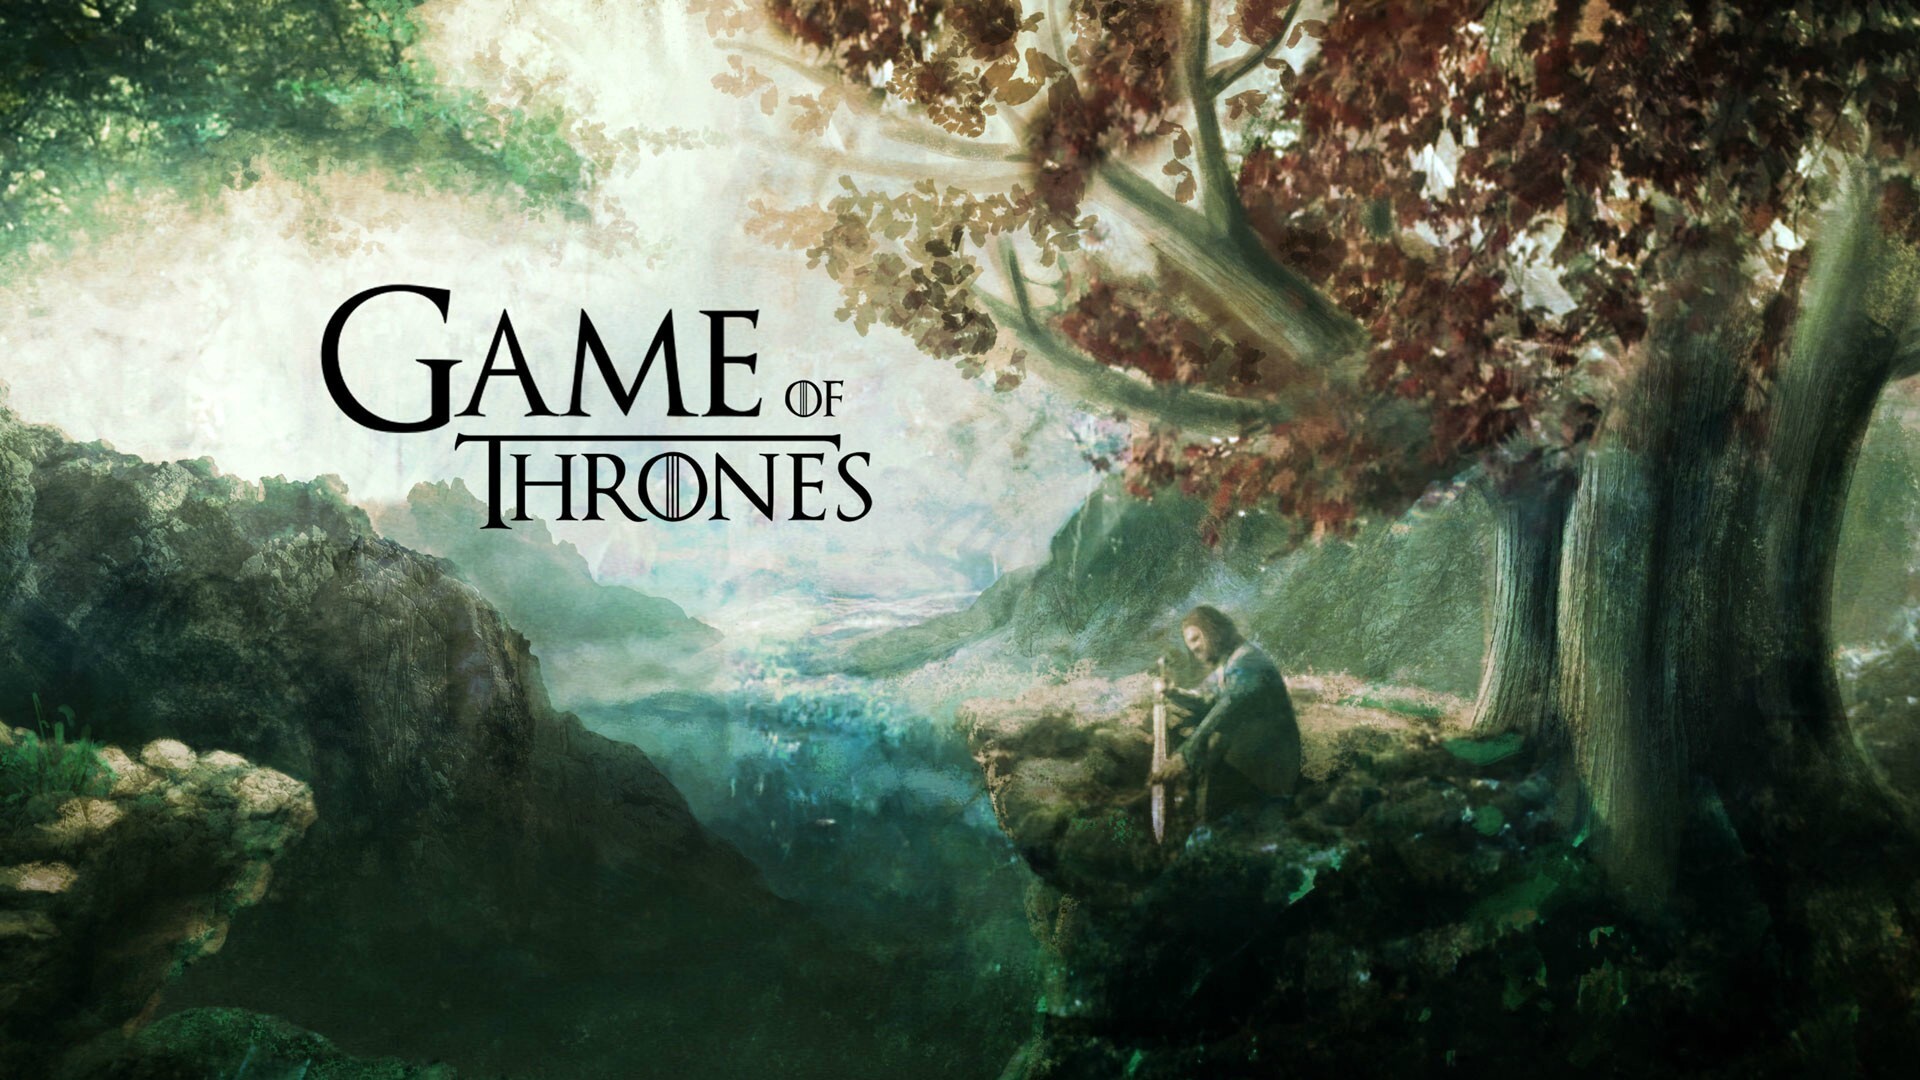 Game of Thrones: Ramin Djawadi composed the series's music. 1920x1080 Full HD Background.